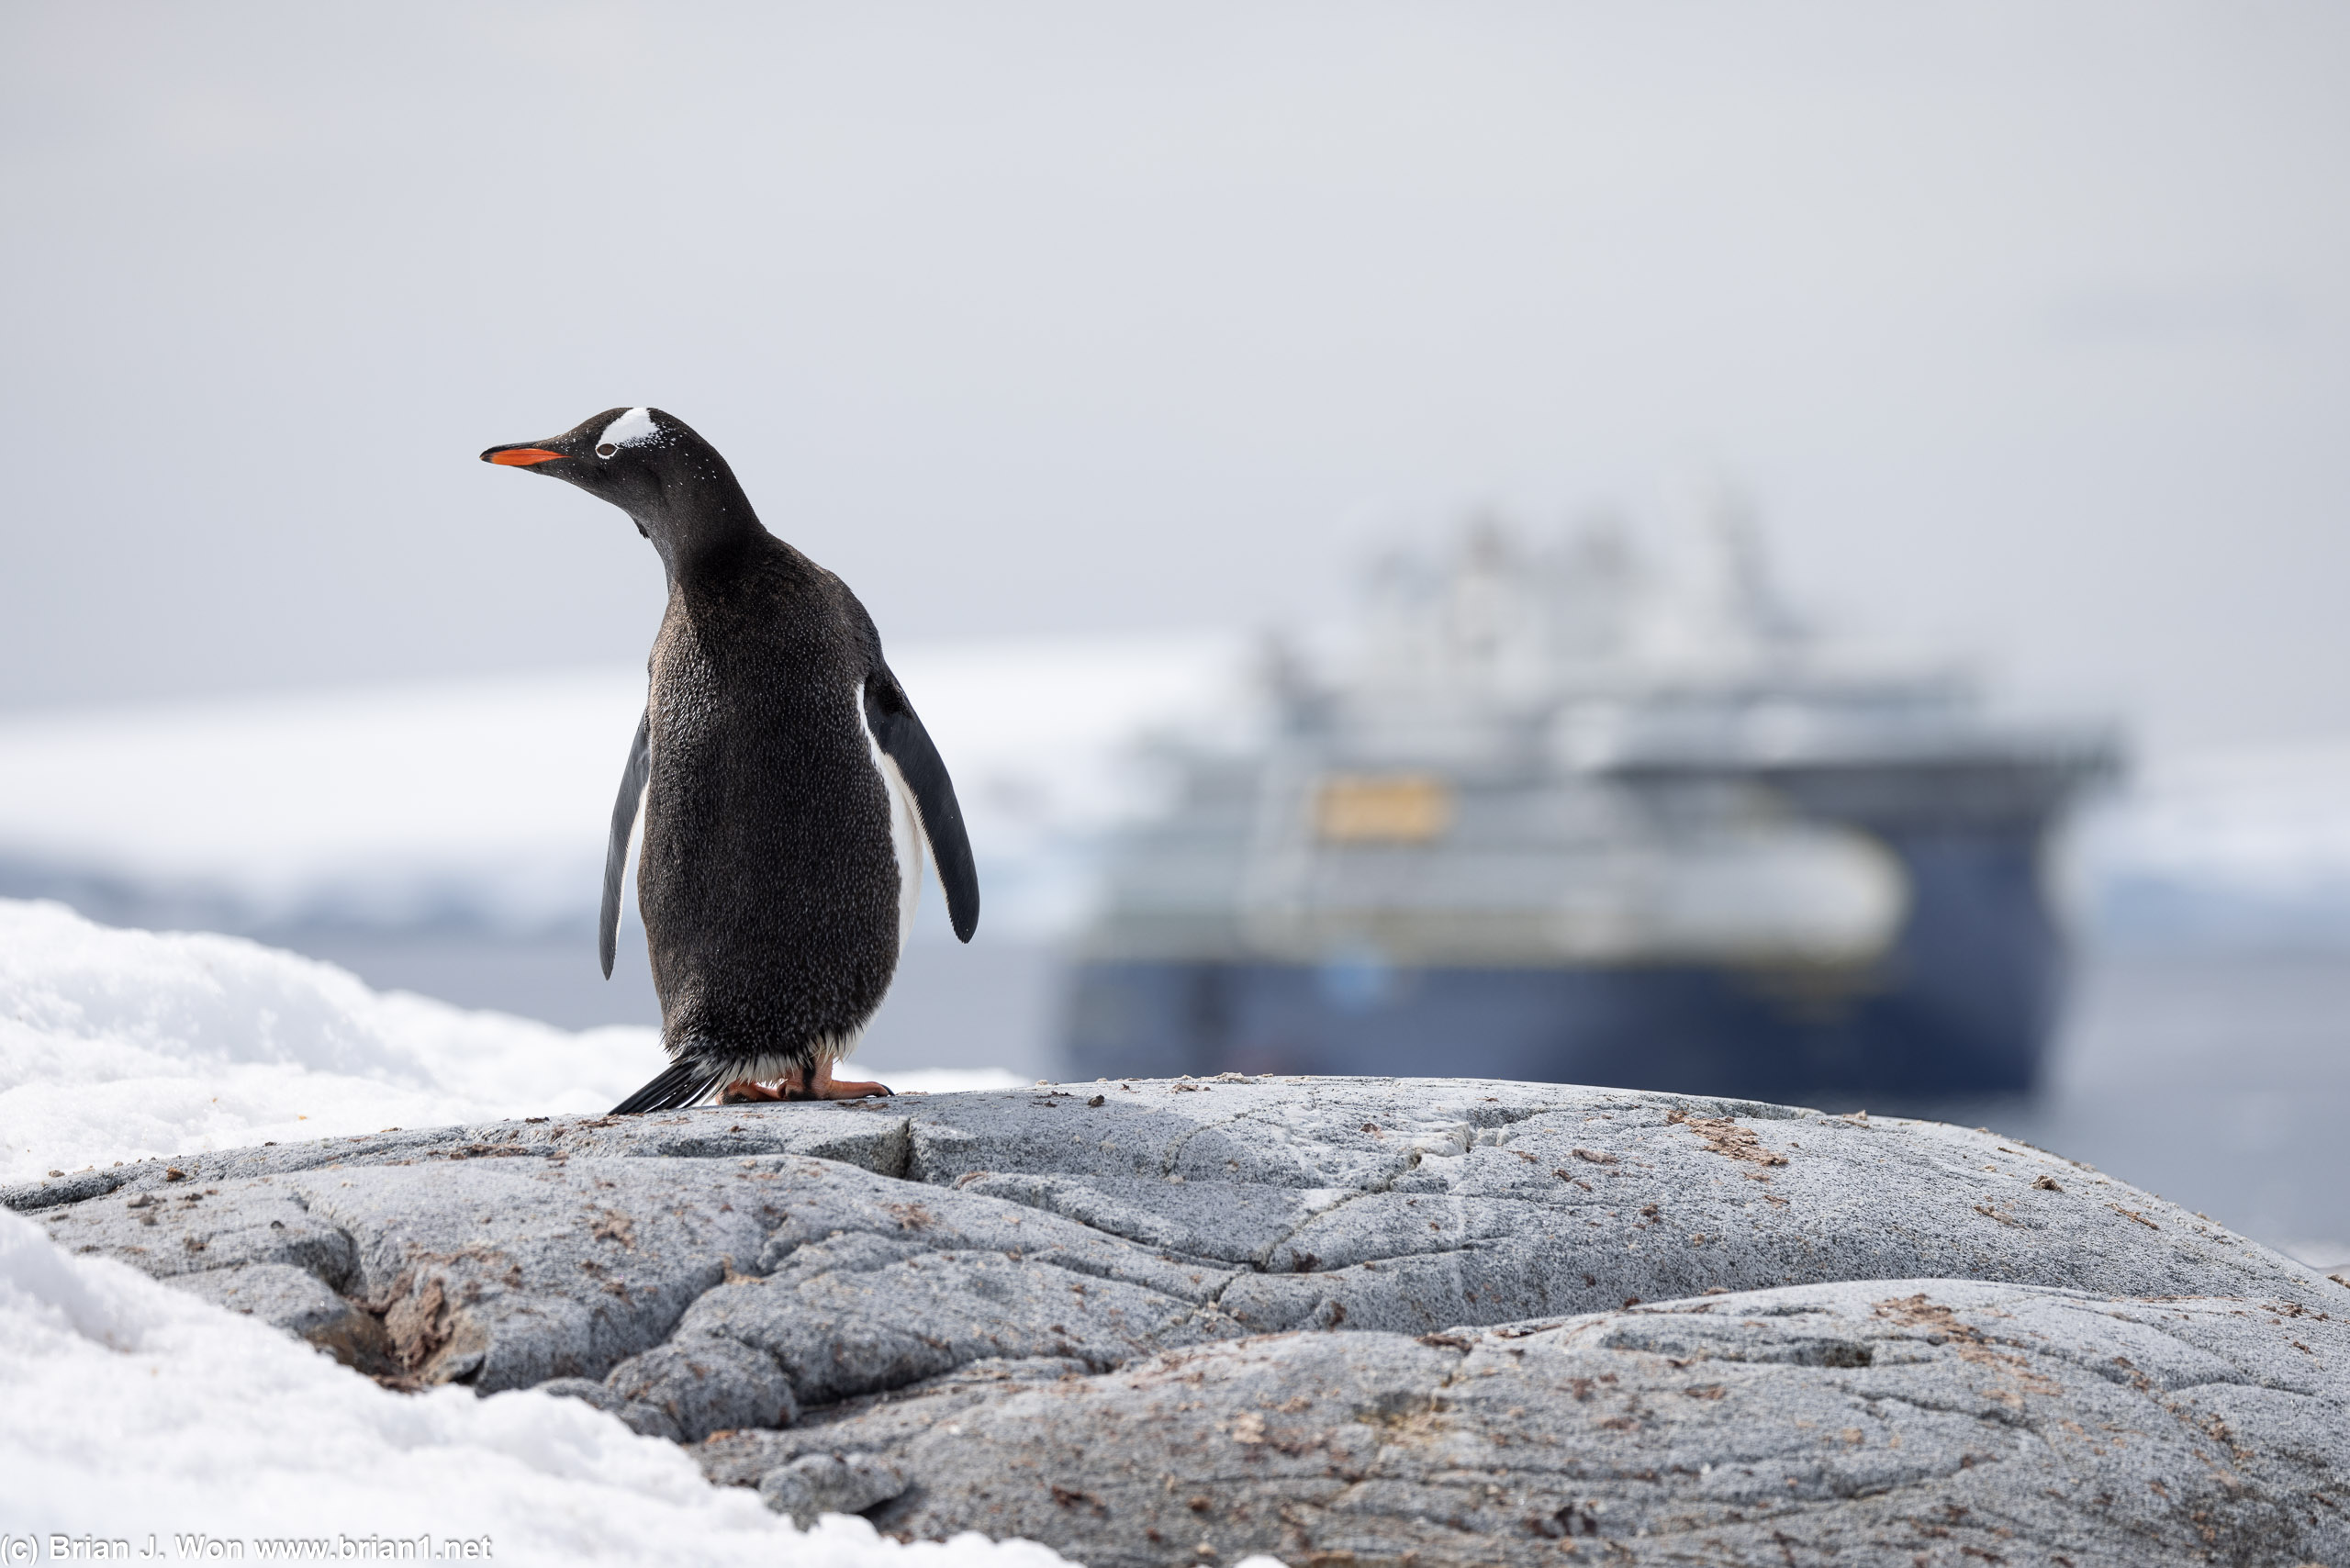 Gentoo penguin checking out both the ship and the tourists it has deposited on his/her island.